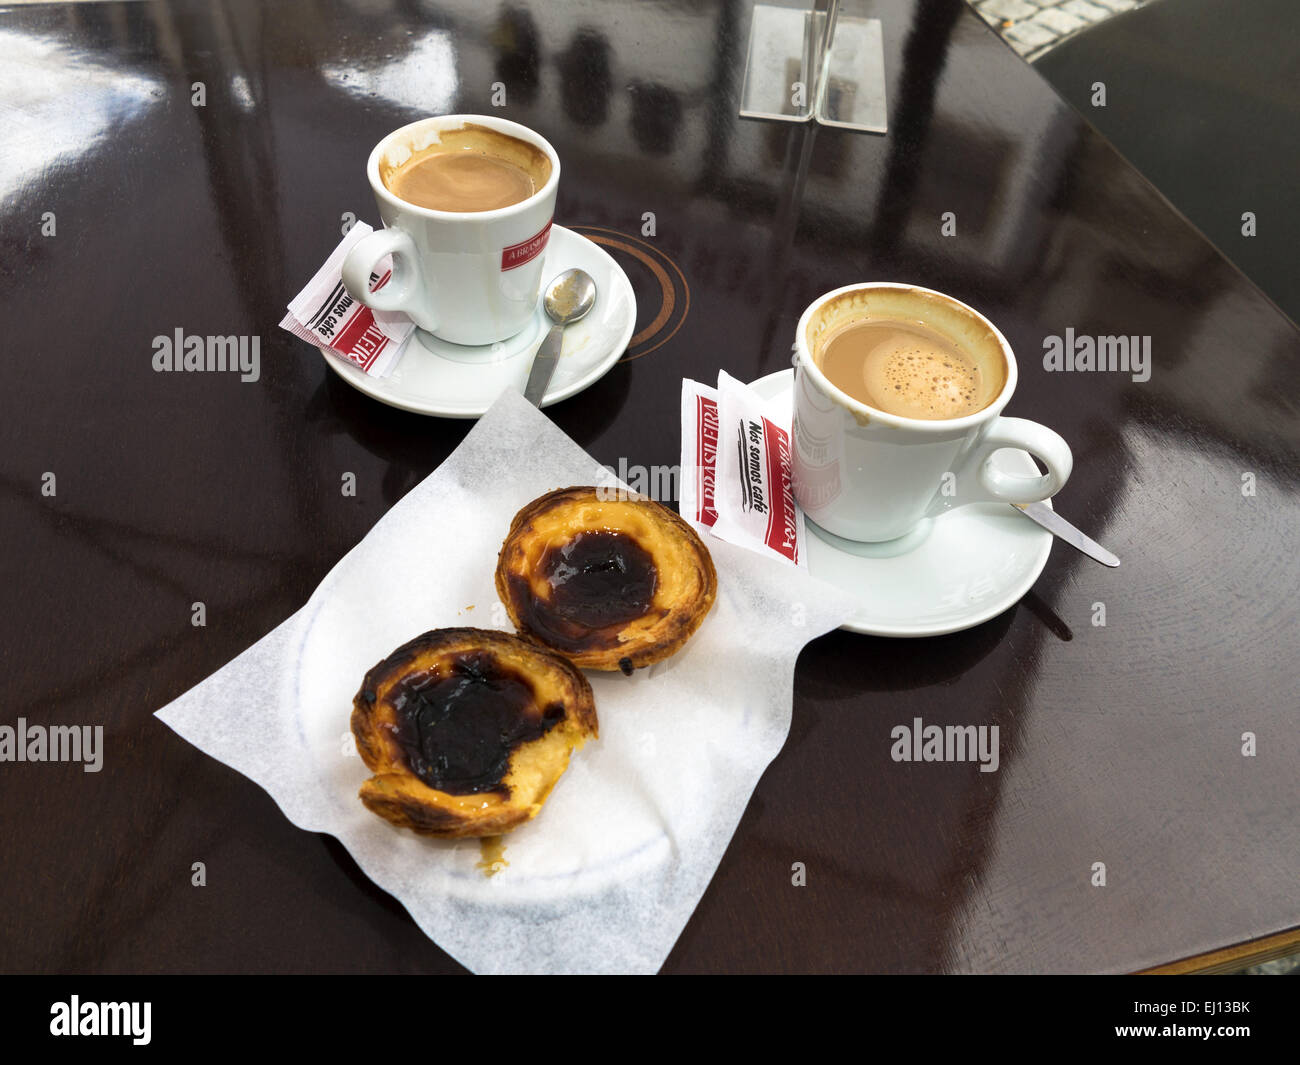 Pastel de Nata a Portuguese egg tart pastry and two cups of coffee on a dark brown table Stock Photo